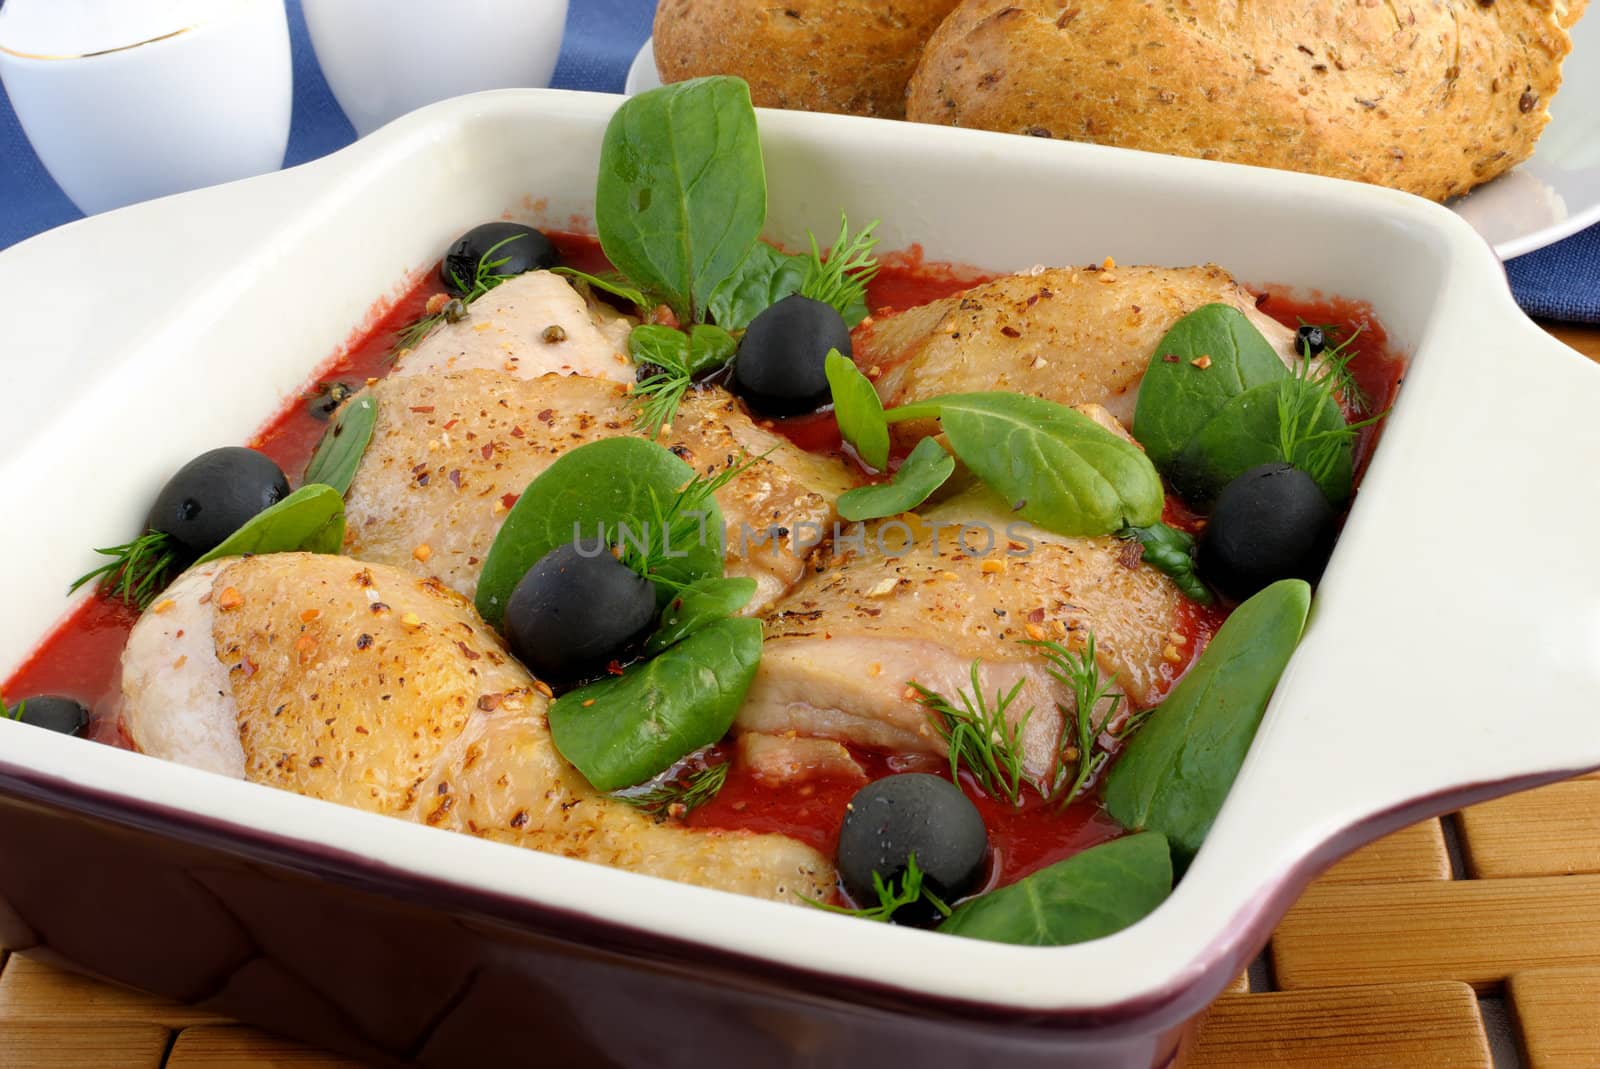 Pieces of chicken in tomato sauce with olives and spinach